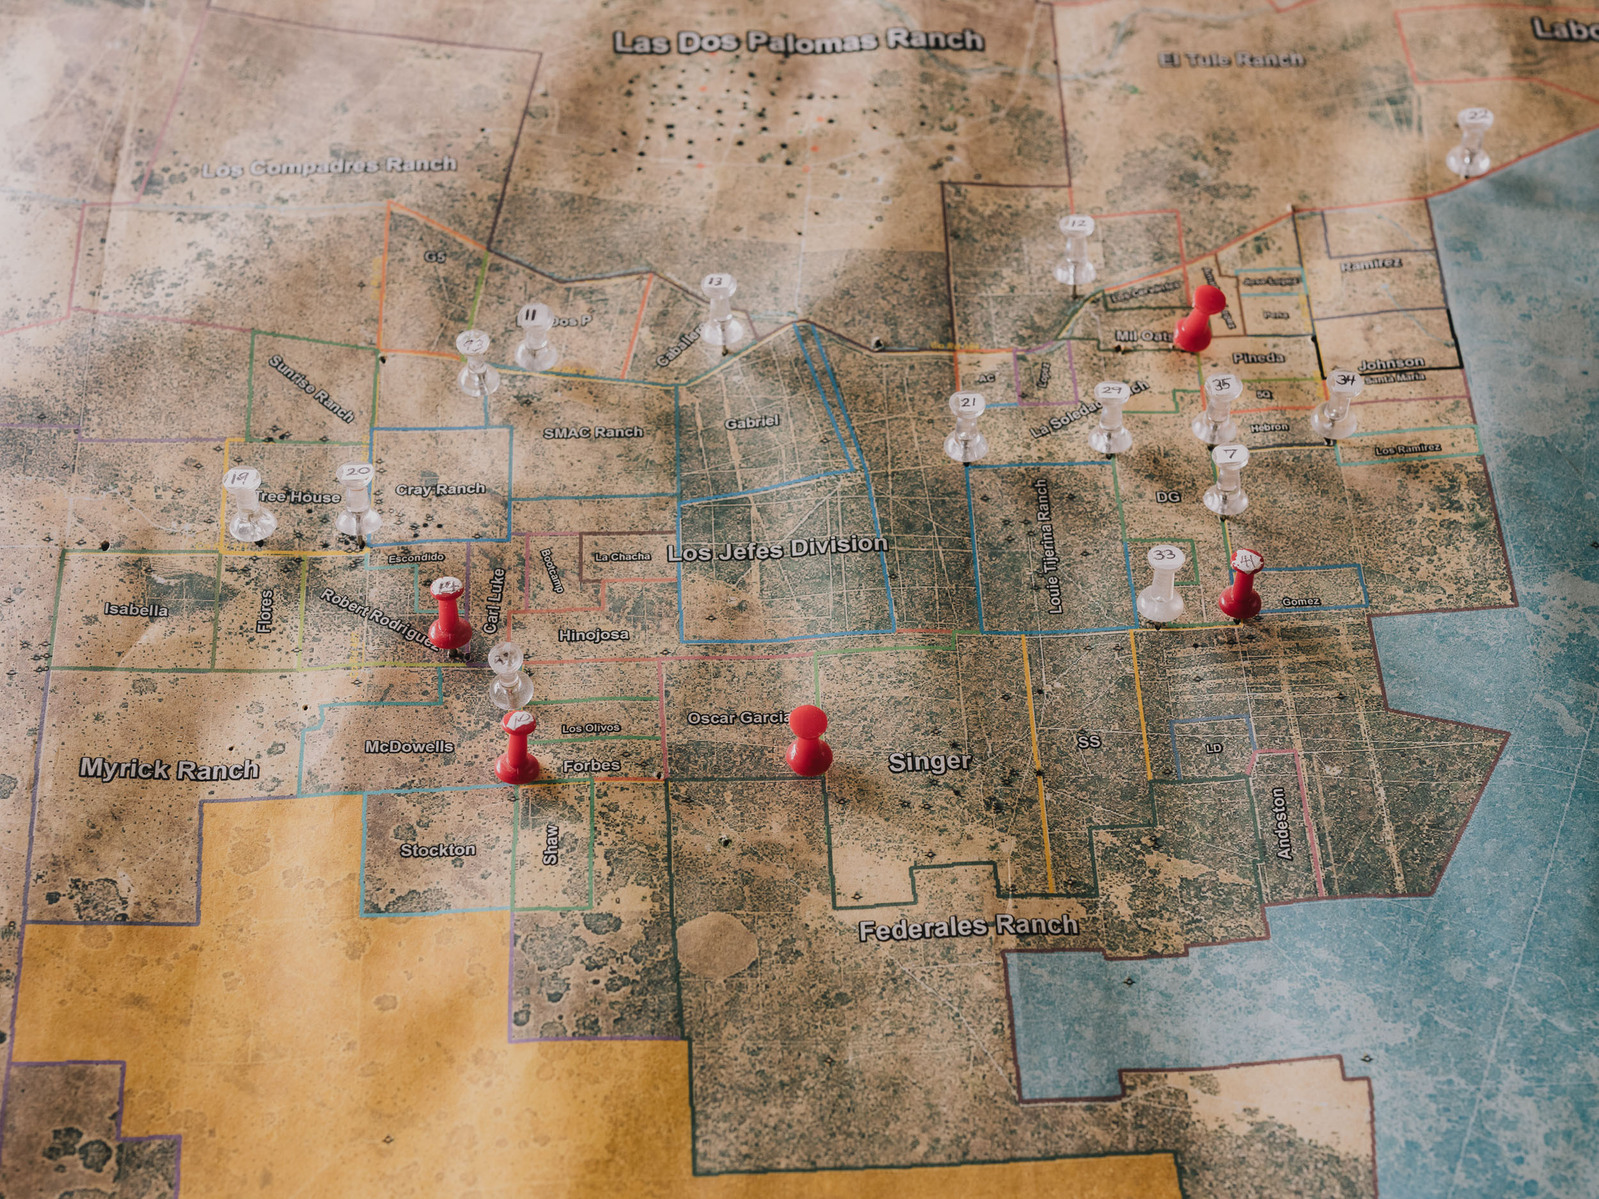 The Missing Migrants of South Texas / Photos by Chris Lee for The New Yorker